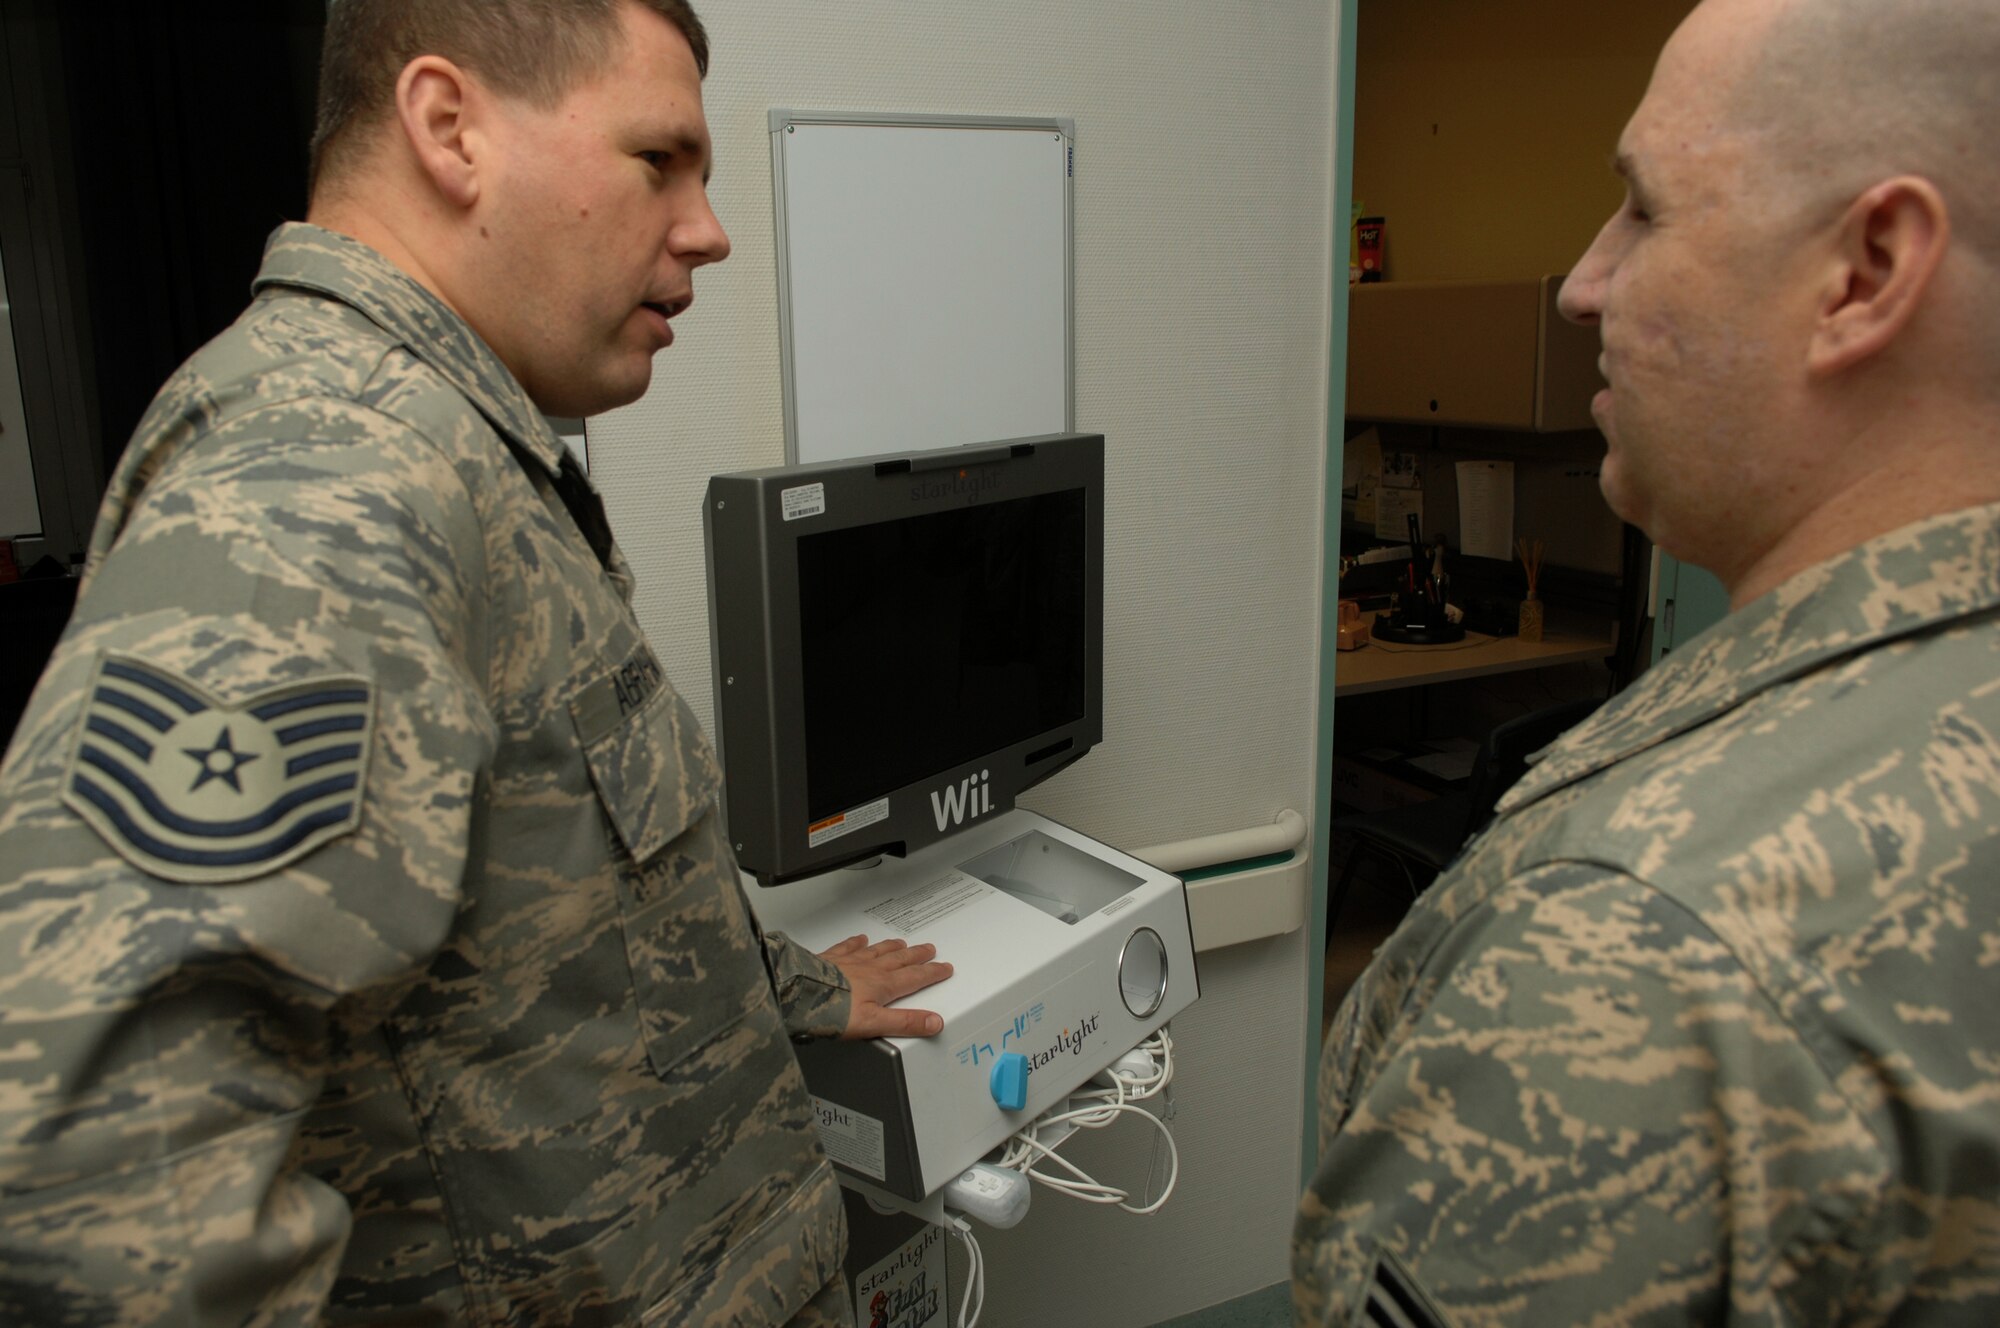 Tech. Sgt. Paul Abraham, Medical Surgery noncommissioned officer in charge, shows off the new Nintendo Wii donated to the ward by Army & Air Forces Exchange Service, to Staff Sgt. Matthew Slaydon, explaining that the game system is used as a physical rehabilitation aid for injured patients, Landstuhl Regional Medical Center, Germany, Nov. 21, 2008. Sgt. Slaydon was severely injured in Iraq 13 months ago during a deployment there as an explosive ordinance disposal technician and is visiting LRMC as part of a morale tour, following his recovery. (U.S. Air Force photo by Airman 1st Class Tony R. Ritter)